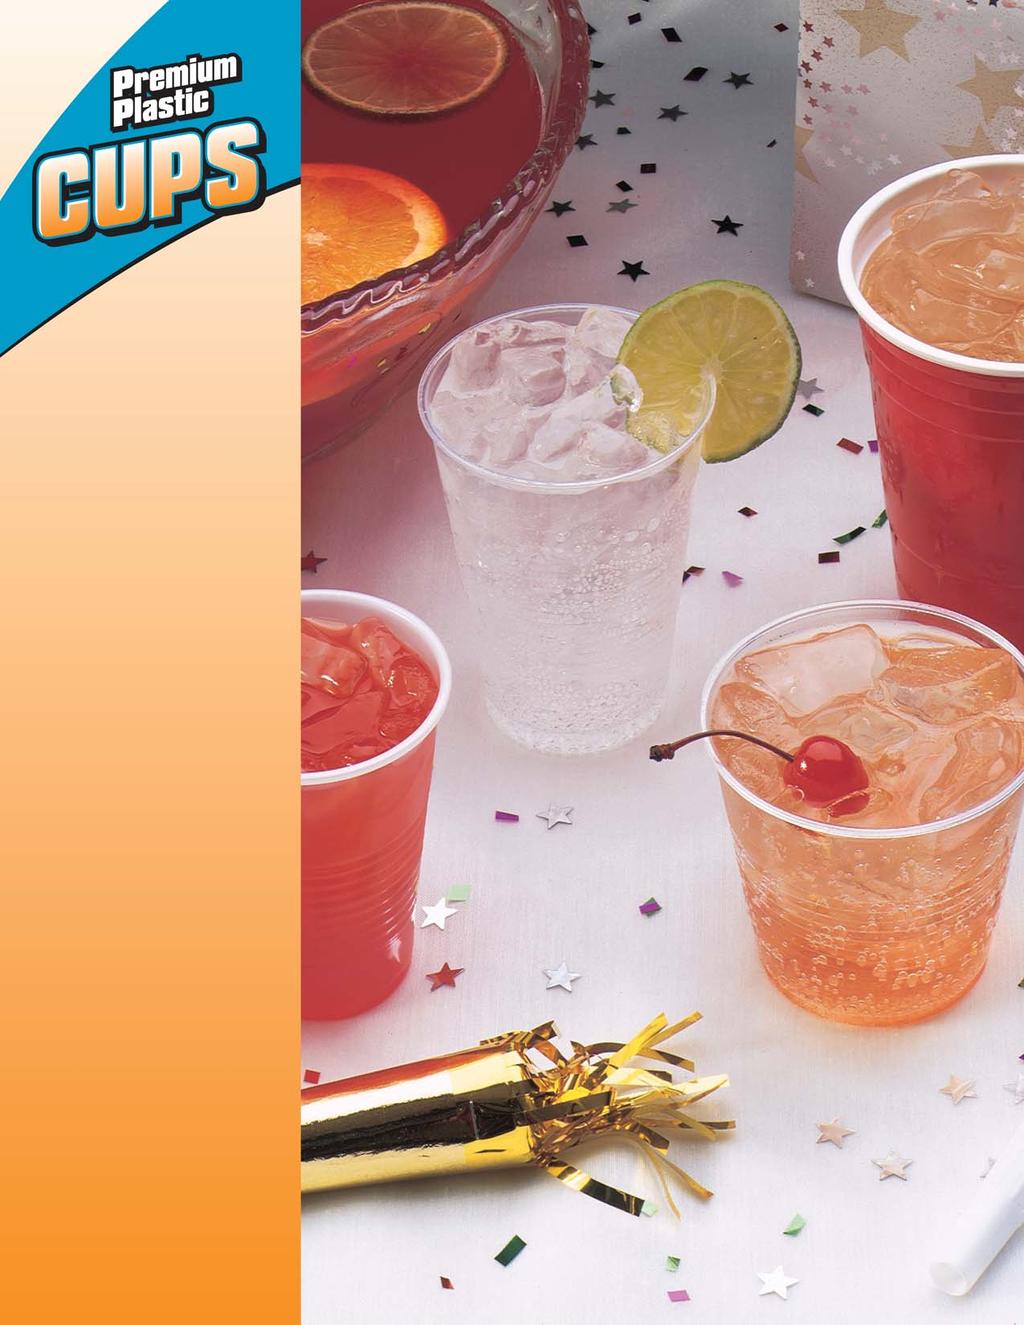 Dart Premium Plastic Cups are both sturdy and fl exible. The ribbed sidewall design provides extra strength and a secure gripping surface that s easy to hold.